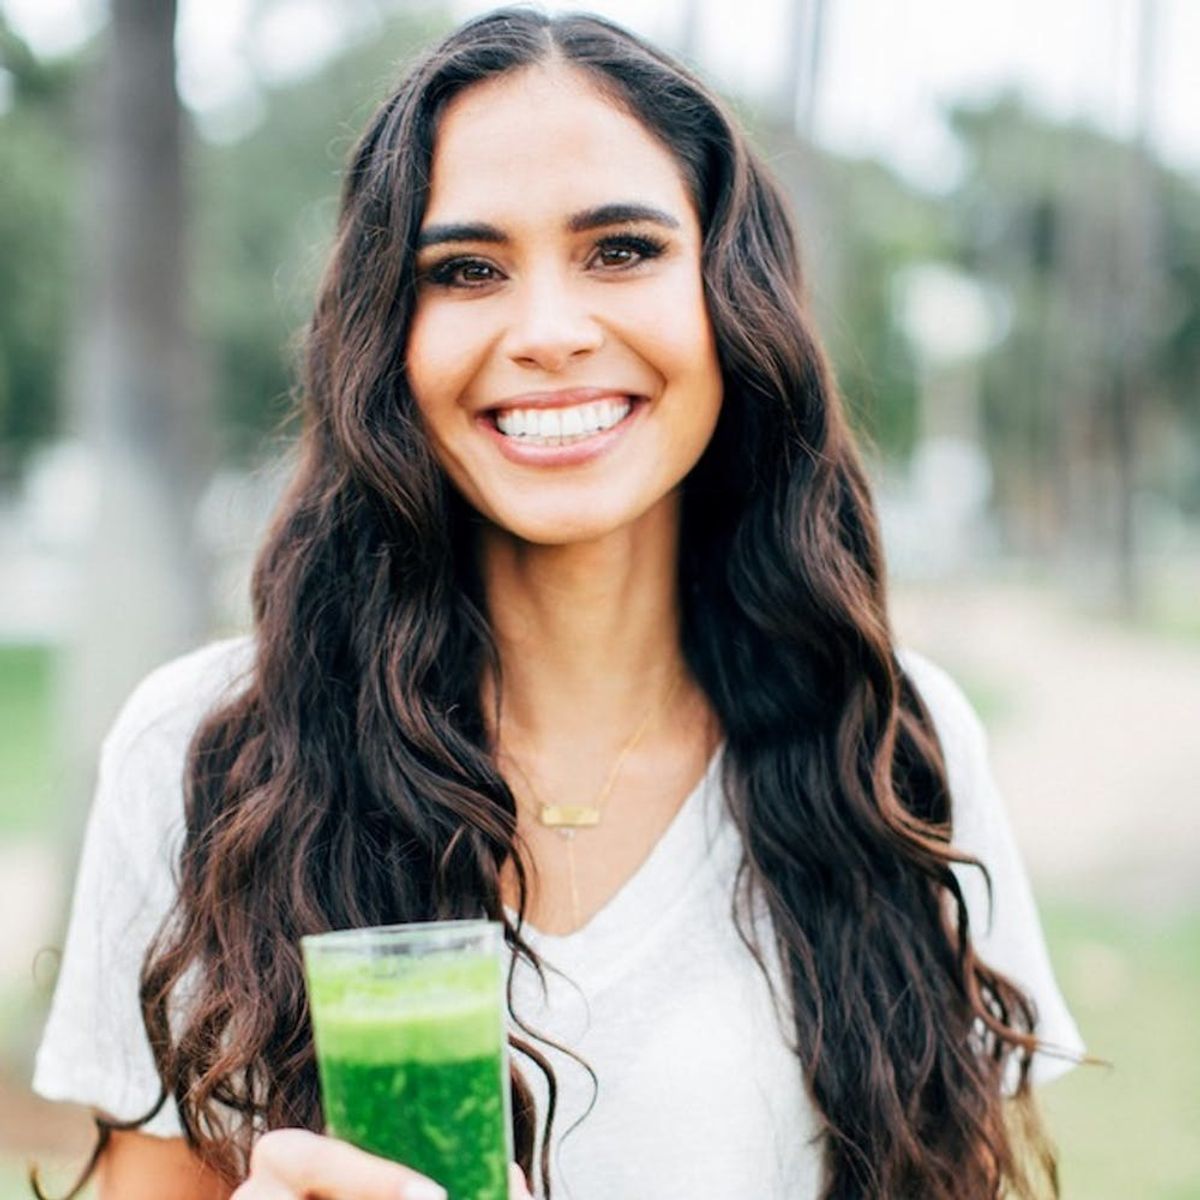 A Top Nutritionist Shares Energizing Tips for Tired New Moms